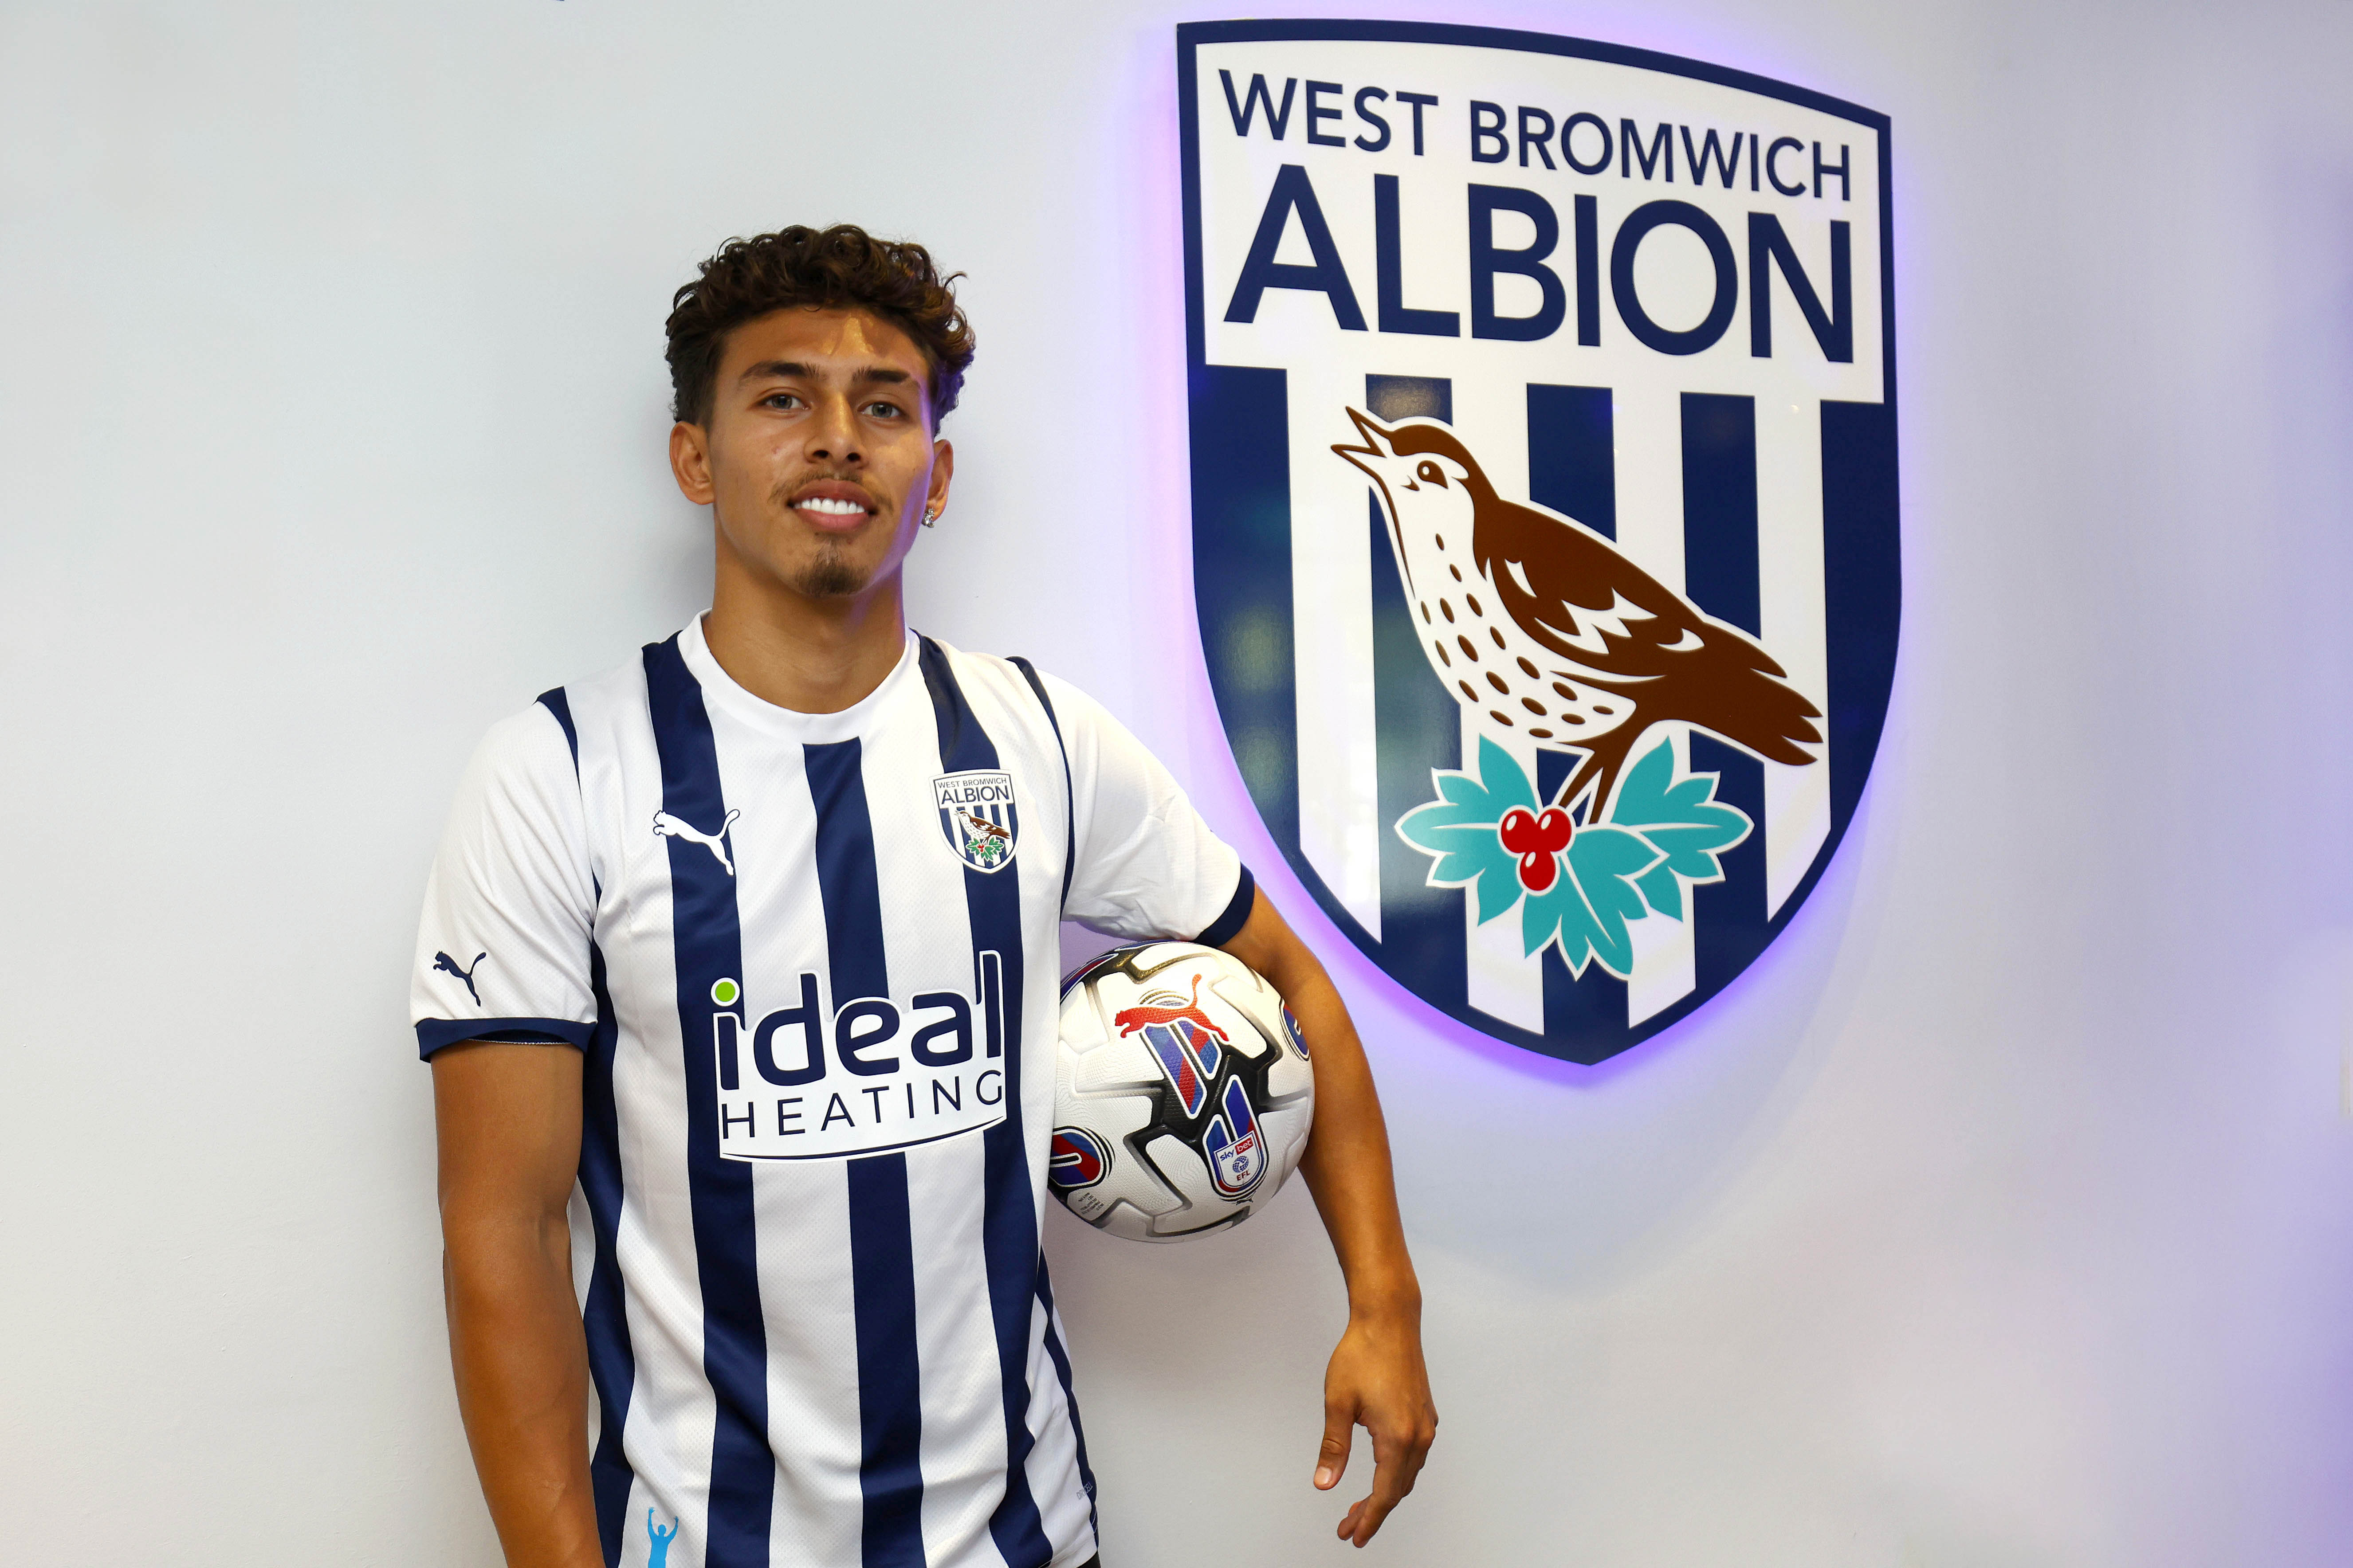 US Firms Sidley and SPB Lead On West Bromwich Albion Sale